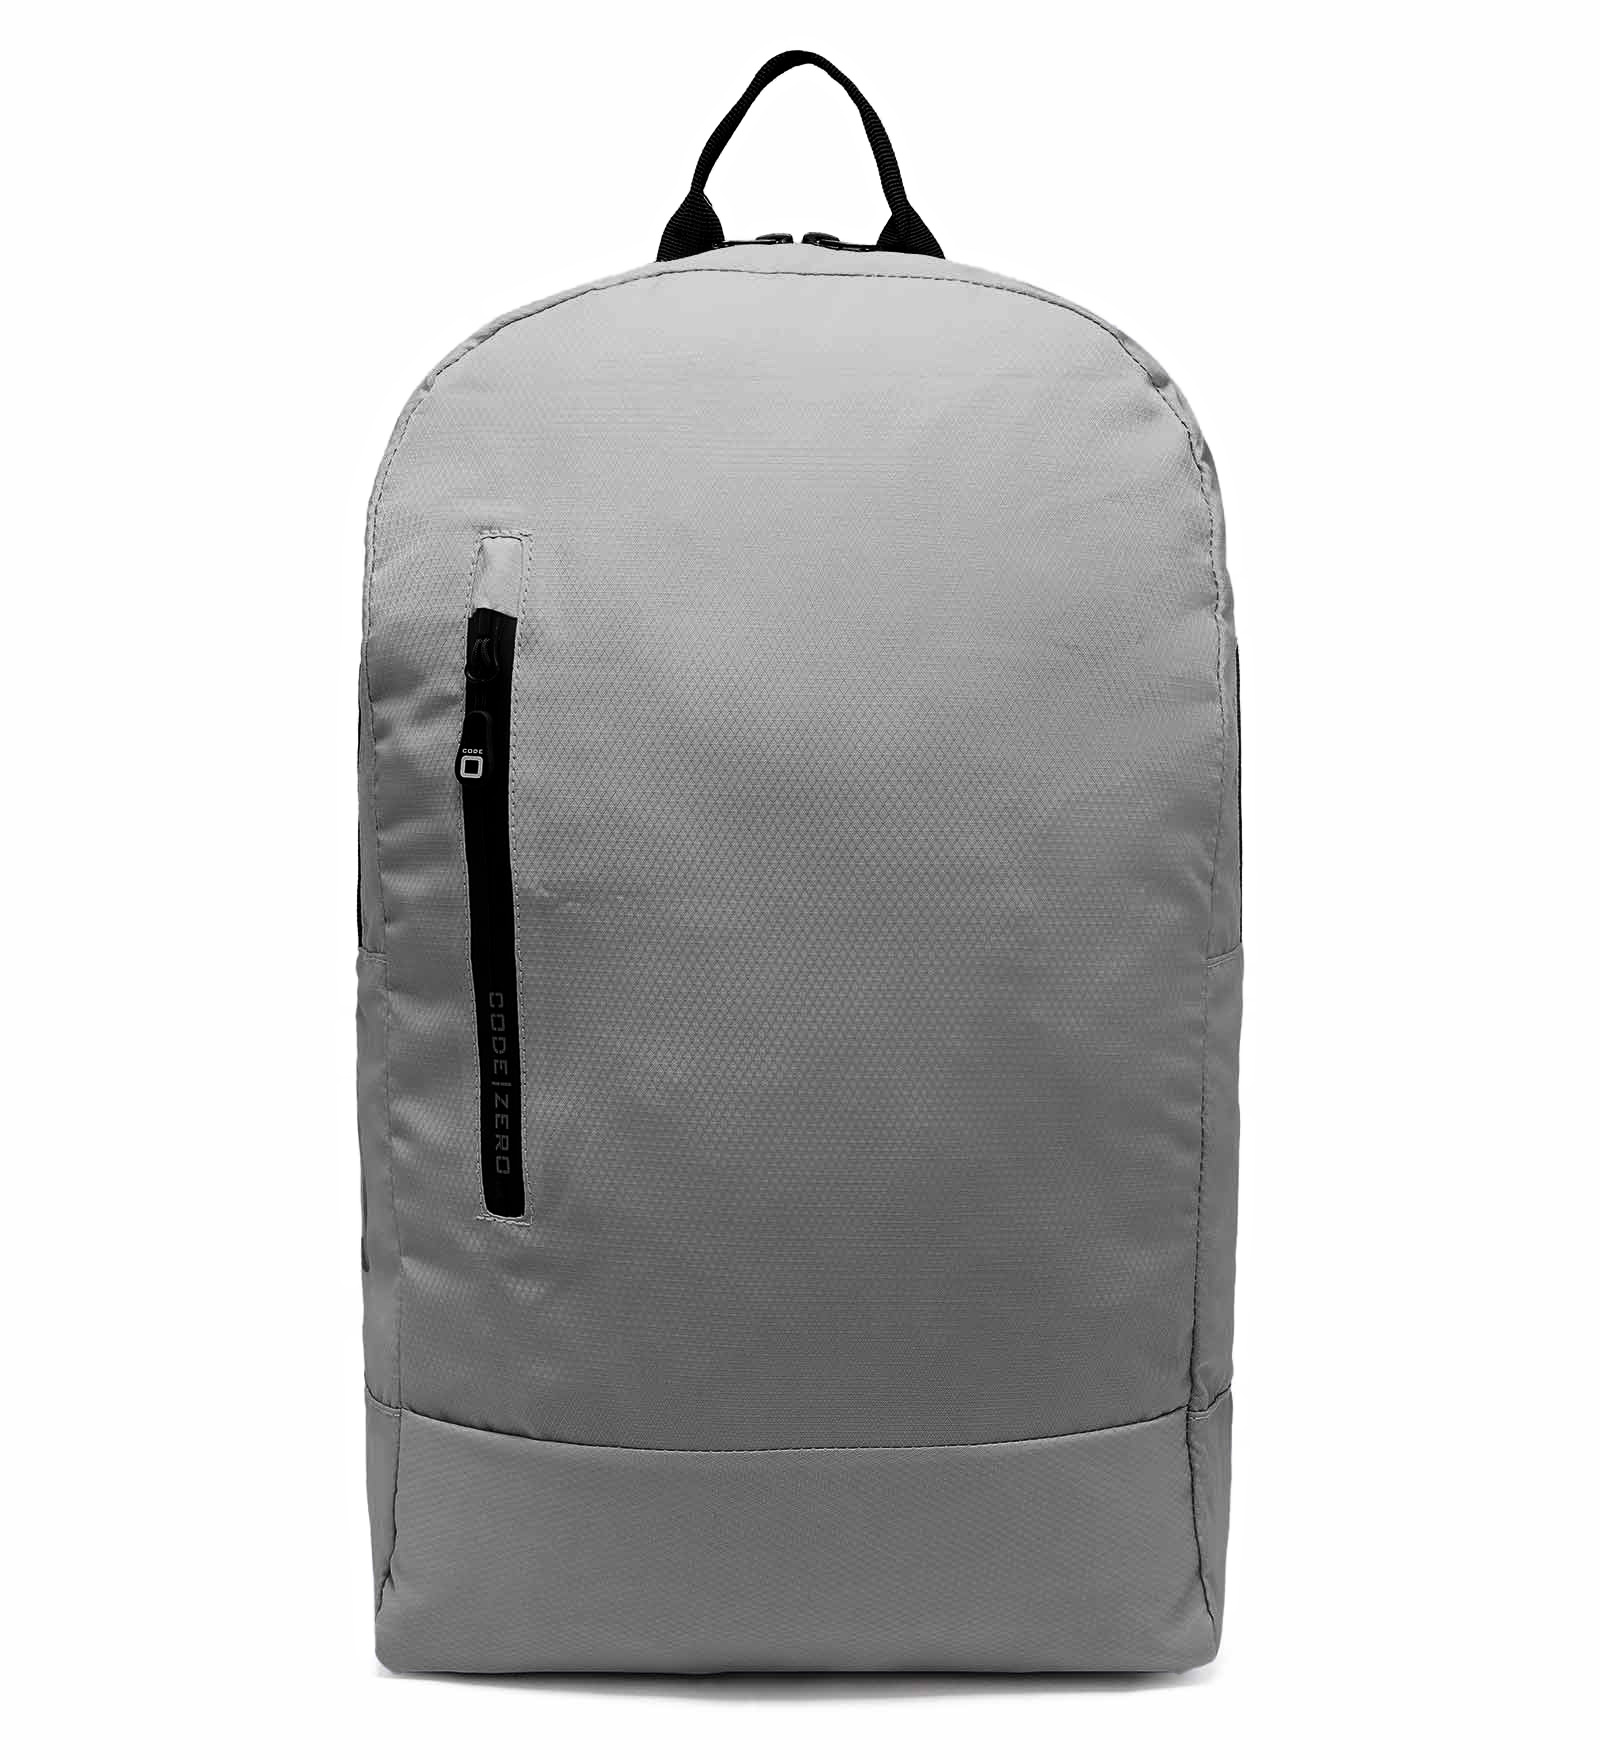 Backpack Grey for Men and Women 